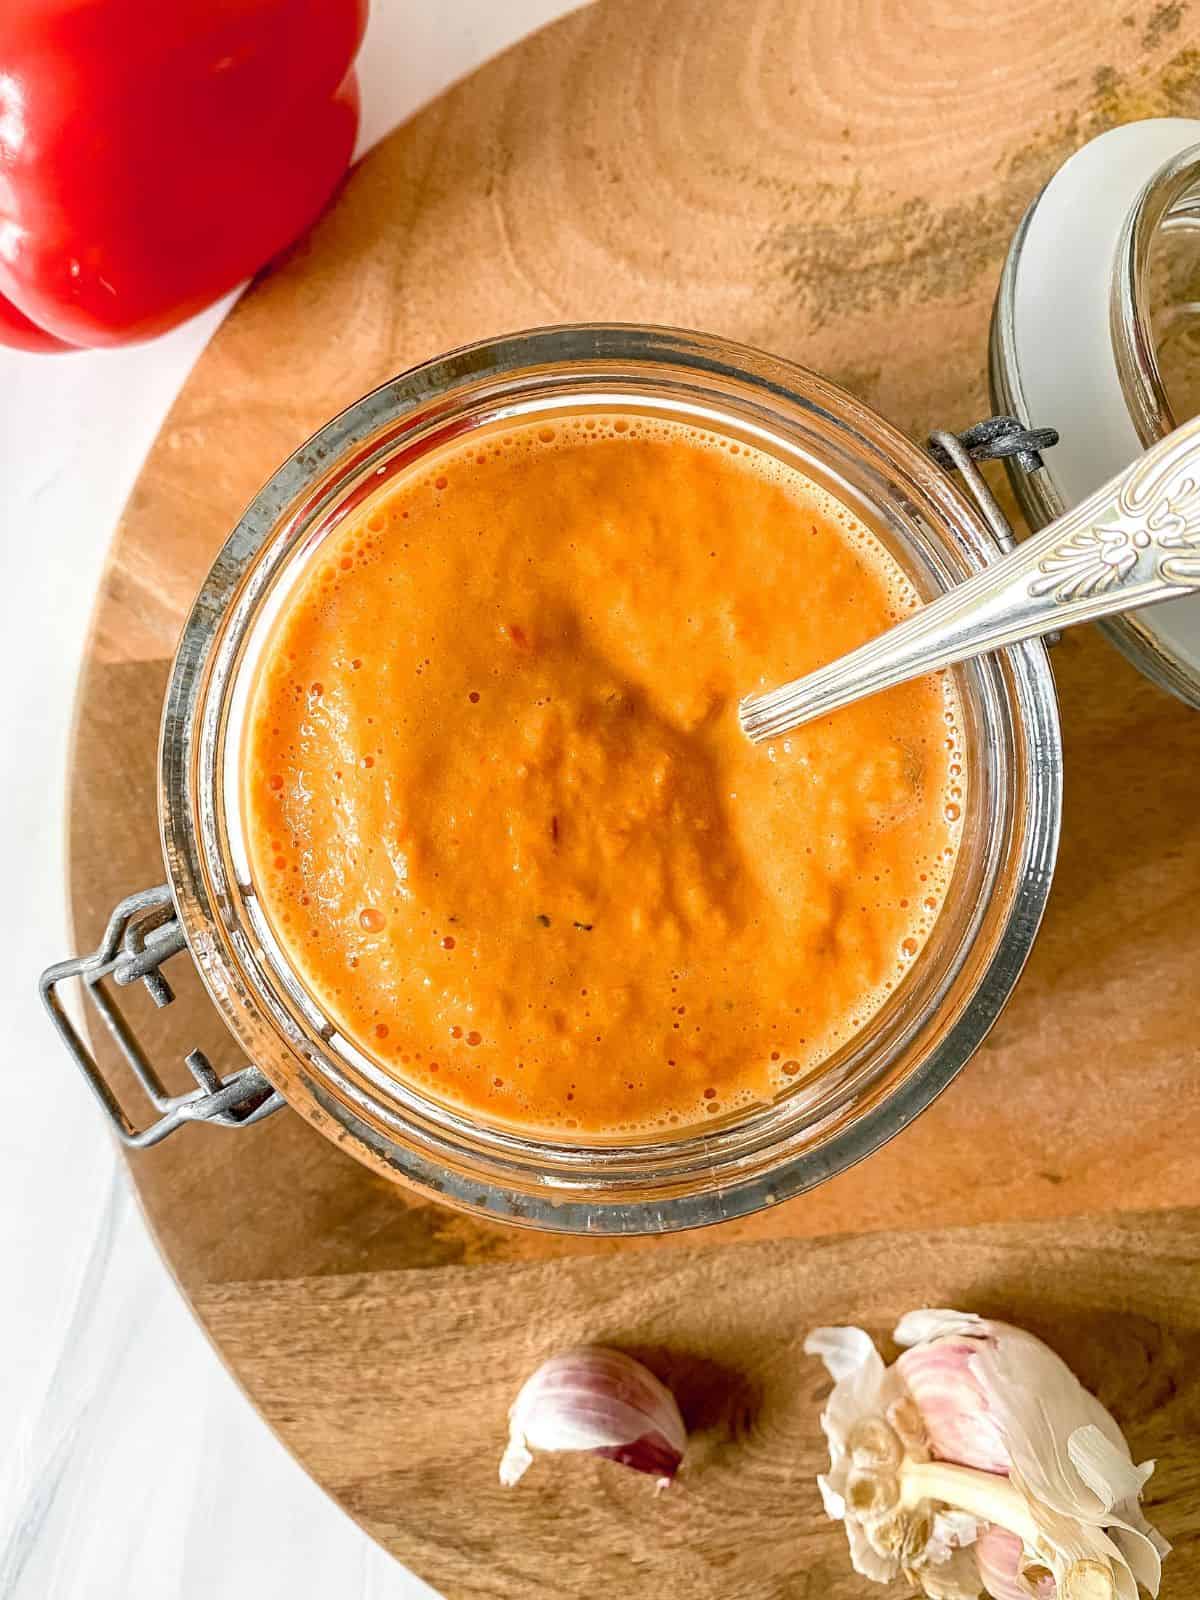 roasted red pepper nomato sauce in a glass jar with a spoon in it.